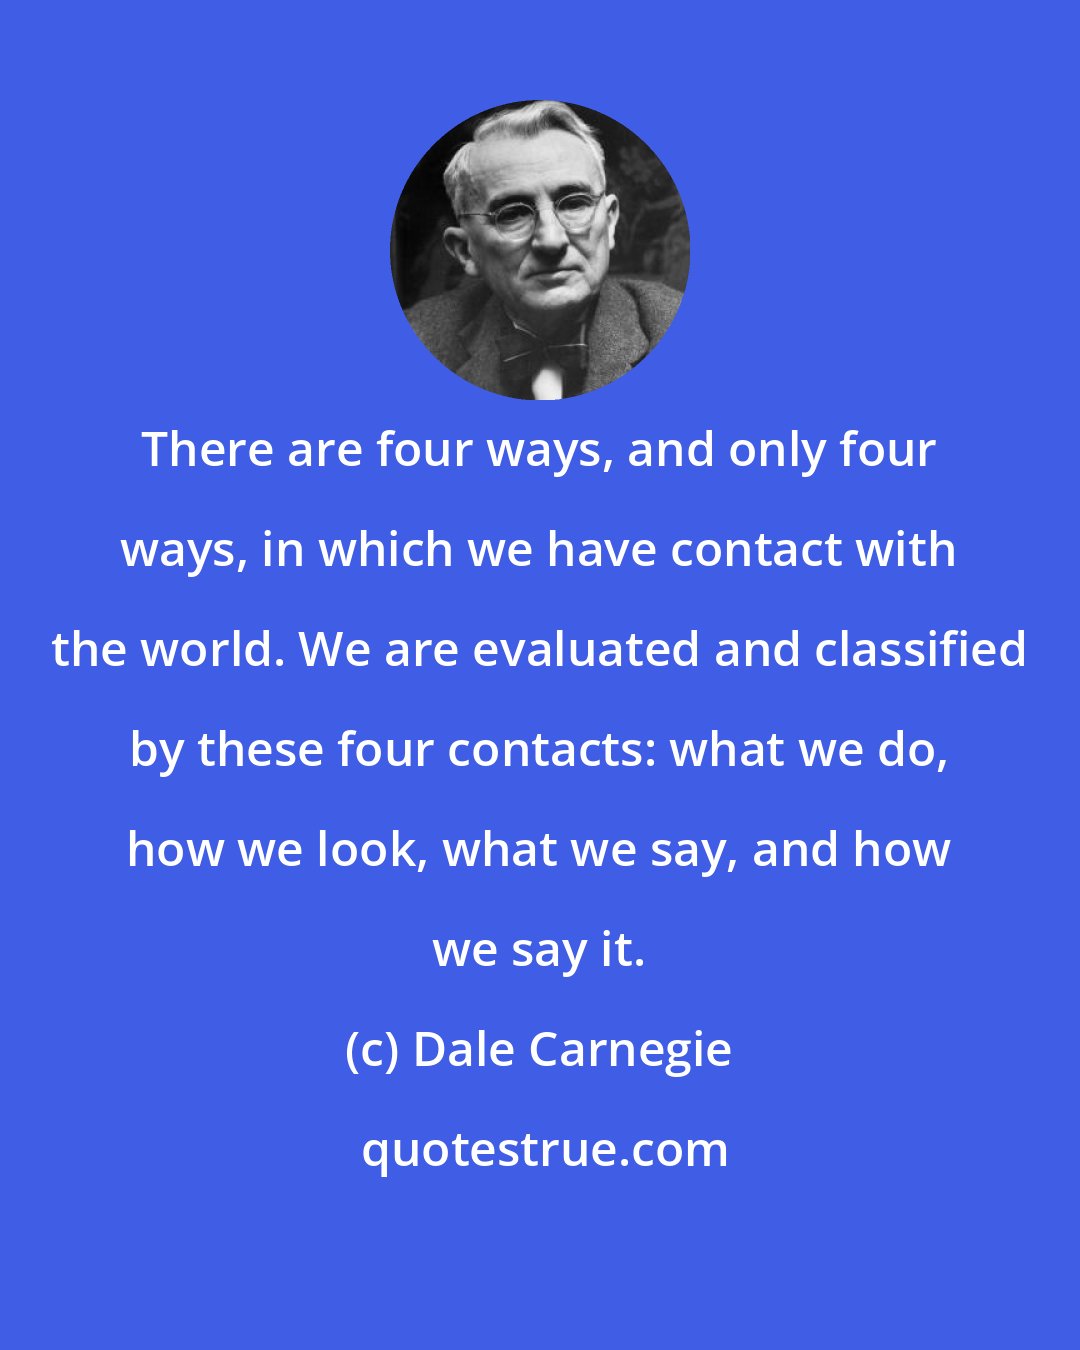 Dale Carnegie: There are four ways, and only four ways, in which we have contact with the world. We are evaluated and classified by these four contacts: what we do, how we look, what we say, and how we say it.